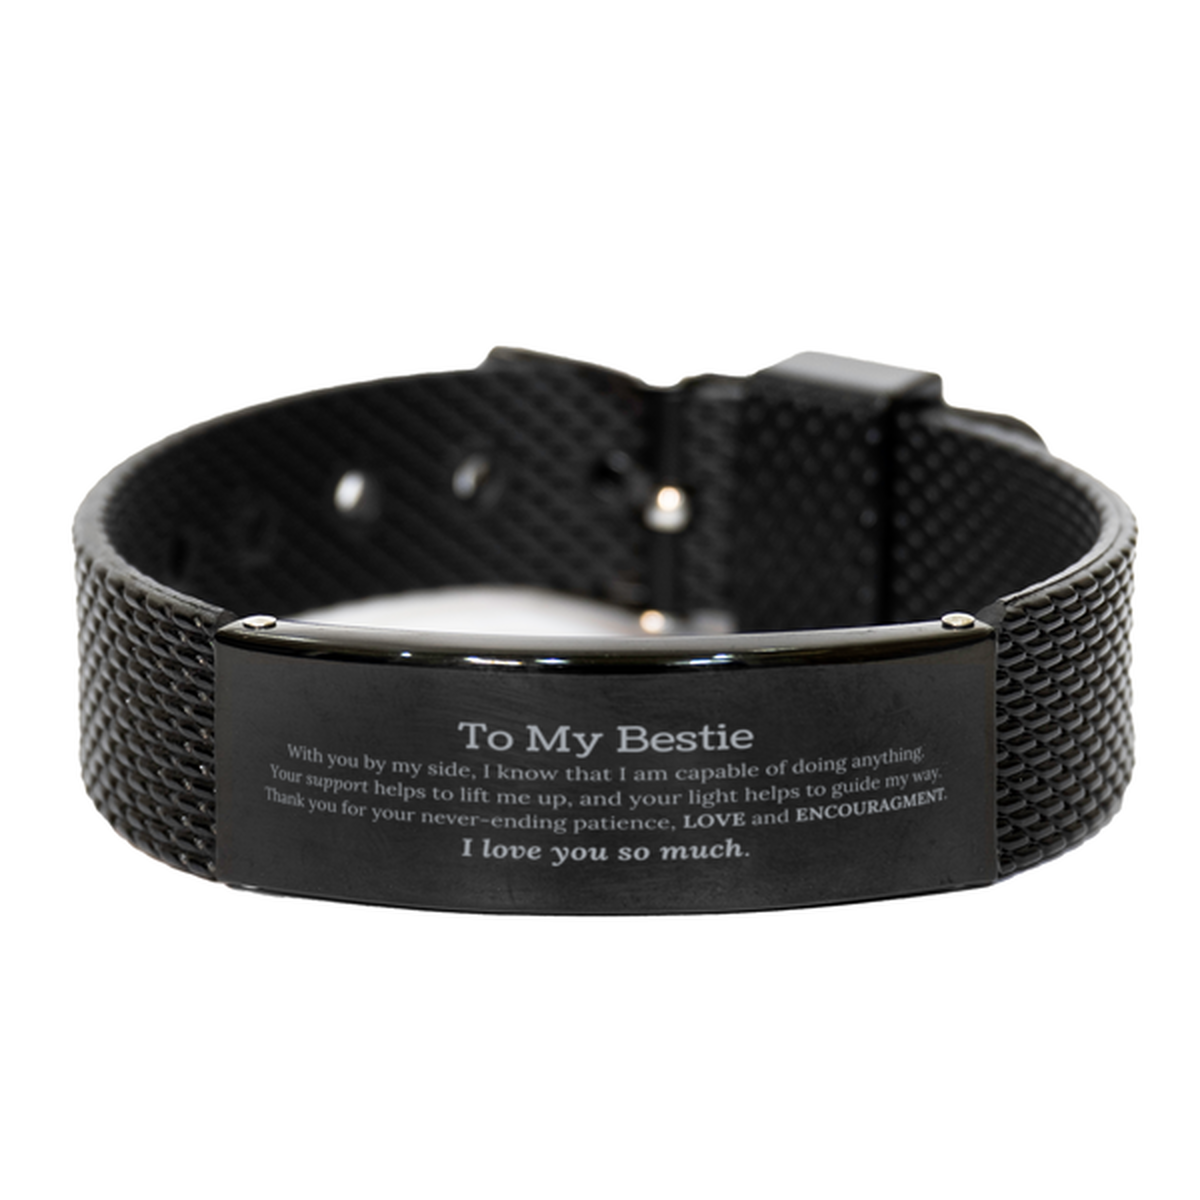 Appreciation Bestie Black Shark Mesh Bracelet Gifts, To My Bestie Birthday Christmas Wedding Keepsake Gifts for Bestie With you by my side, I know that I am capable of doing anything. I love you so much